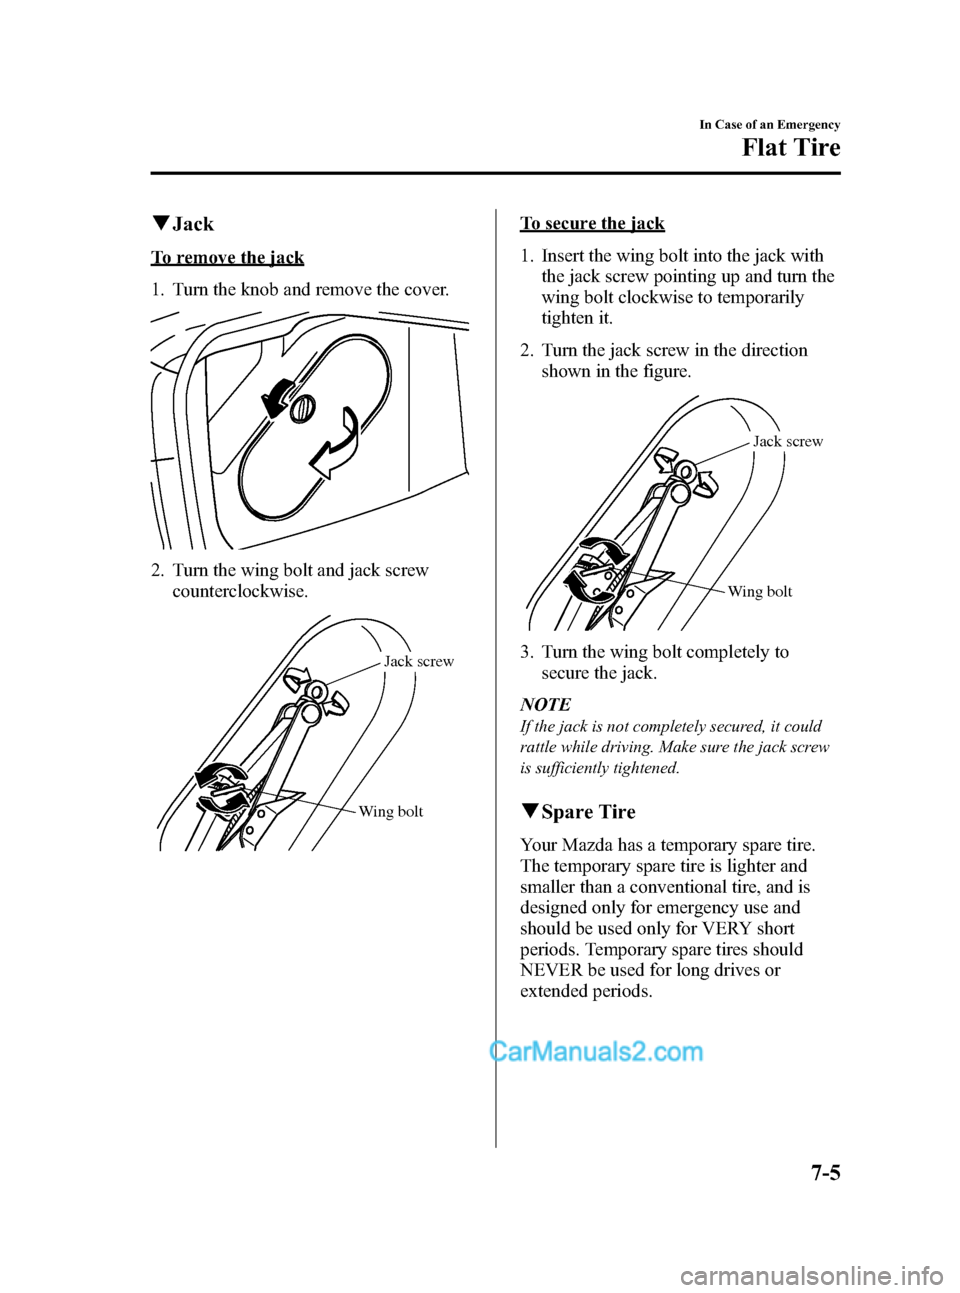 MAZDA MODEL MAZDASPEED 3 2008   (in English) Owners Manual Black plate (249,1)
qJack
To remove the jack
1. Turn the knob and remove the cover.
2. Turn the wing bolt and jack screw
counterclockwise.
Wing boltJack screw
To secure the jack
1. Insert the wing bol